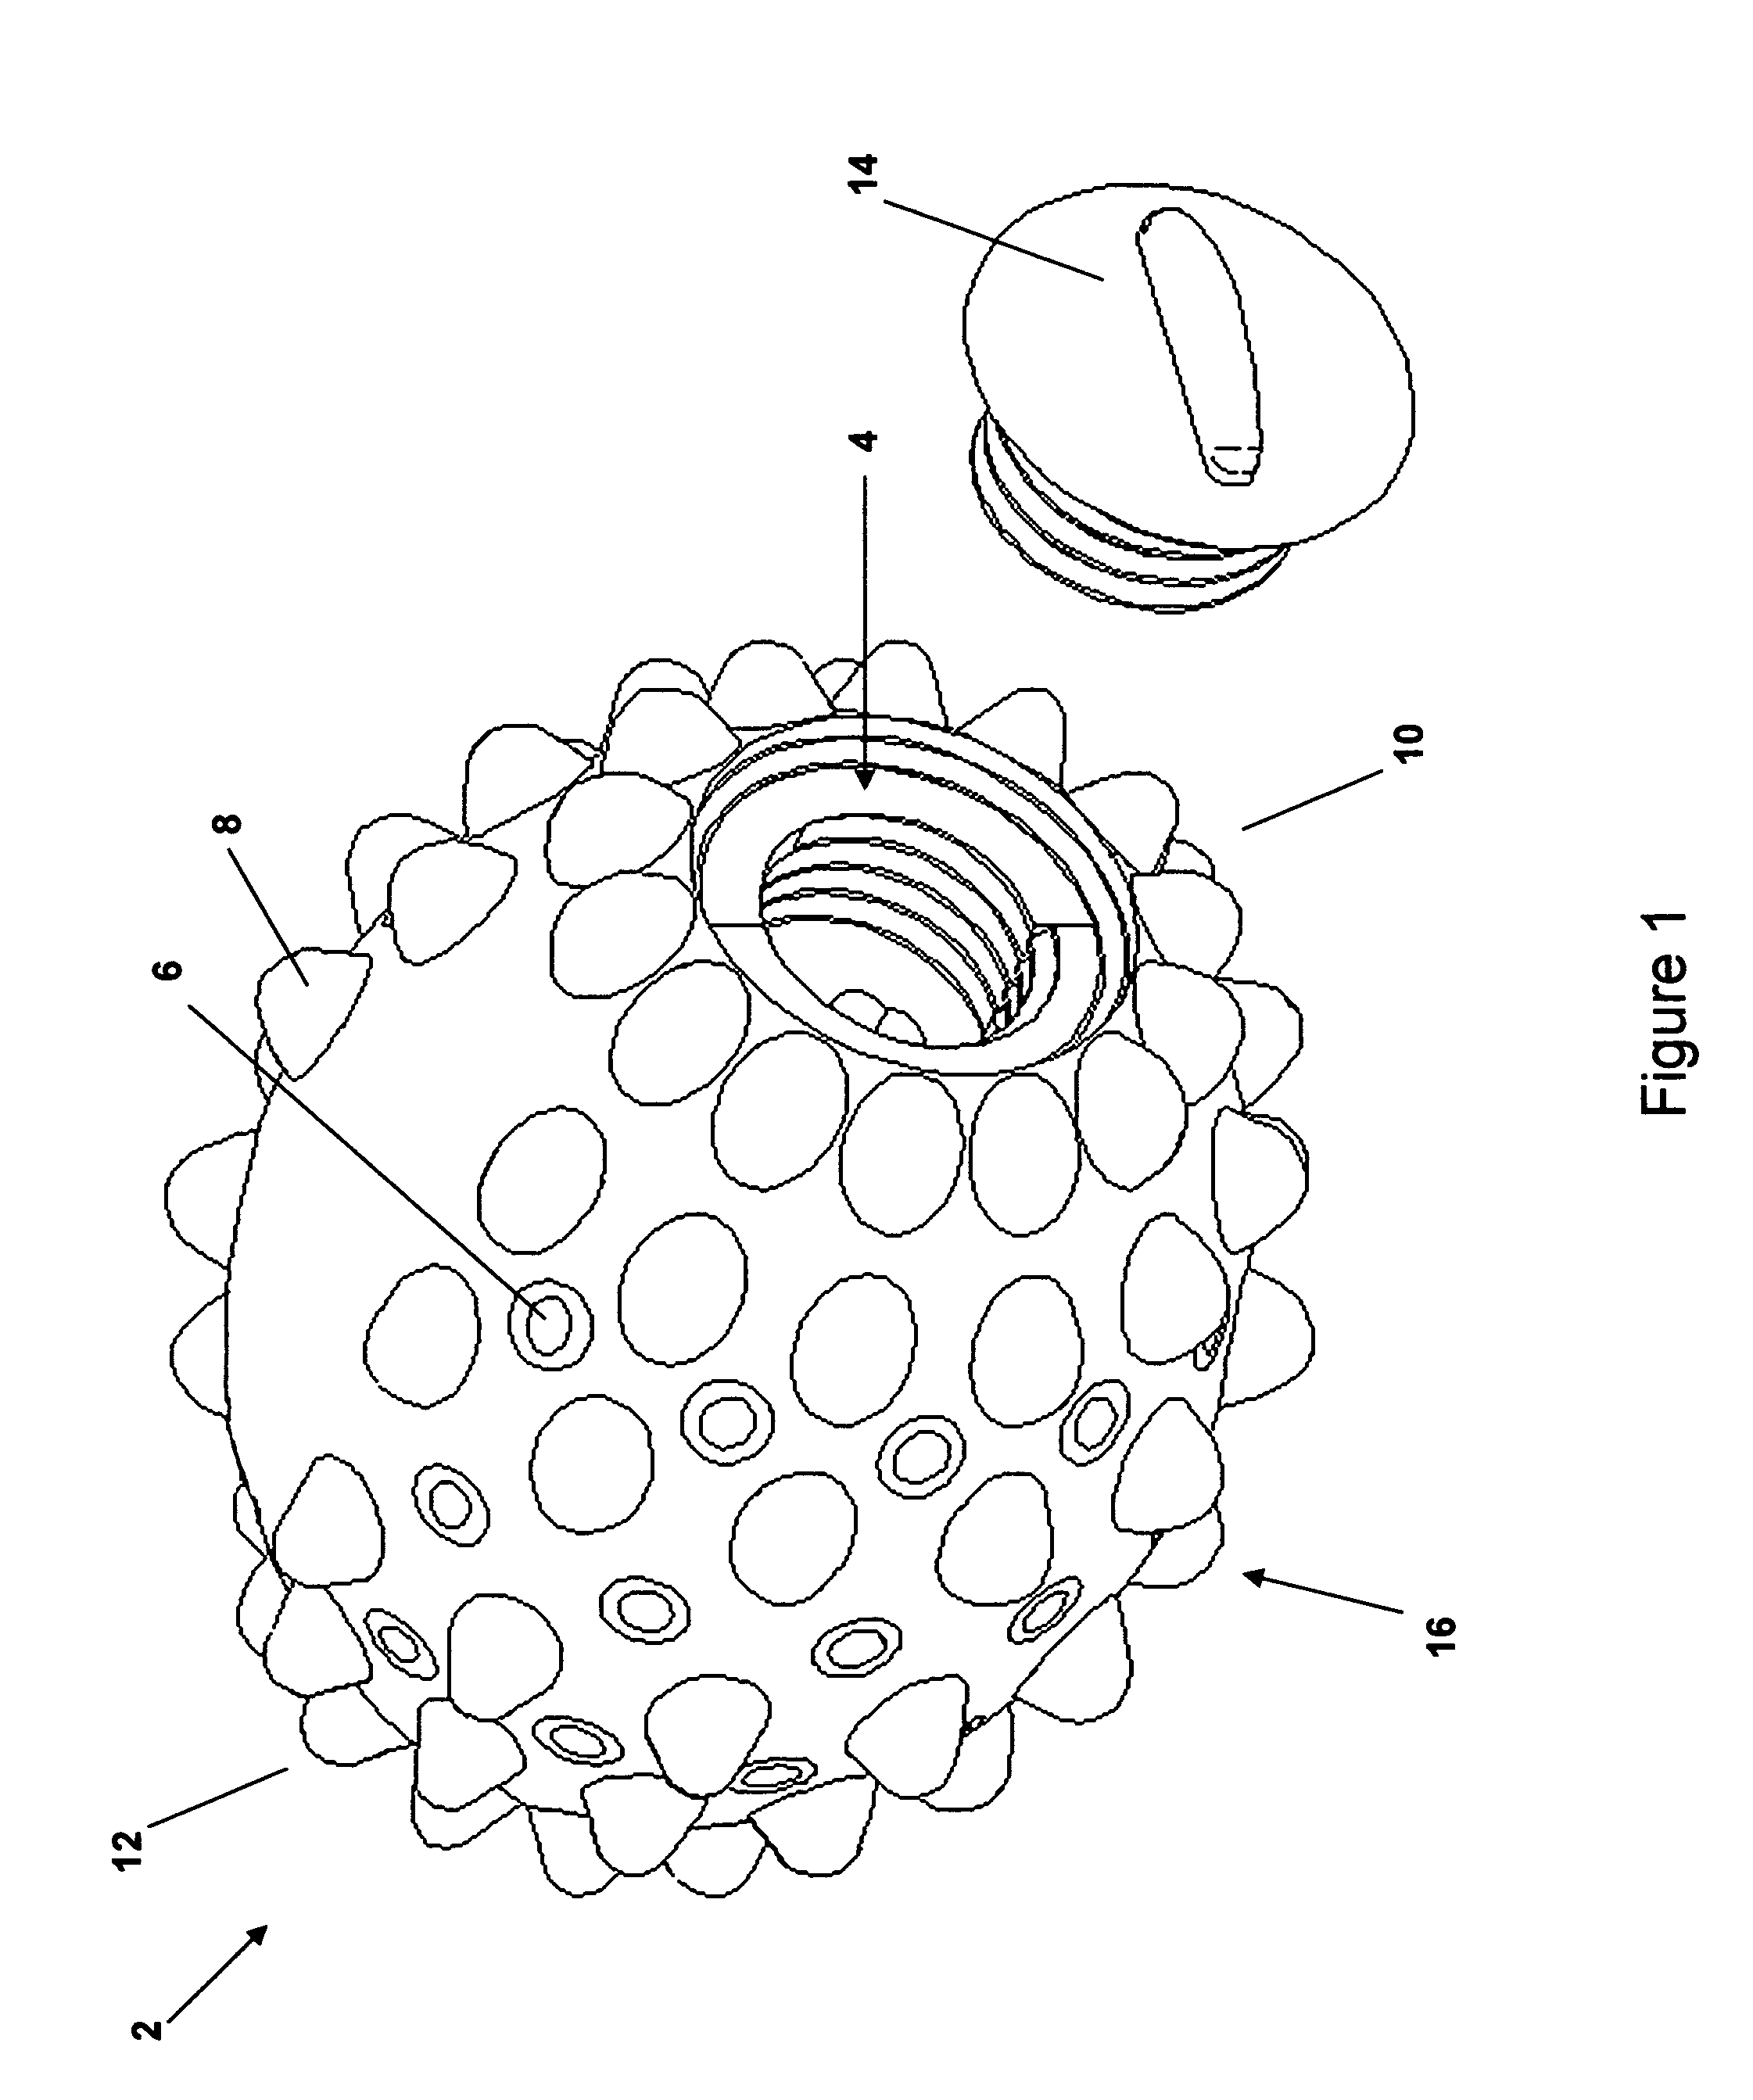 Environmentally sensitive multi-use apparatus for administering and dispensing laundry additives